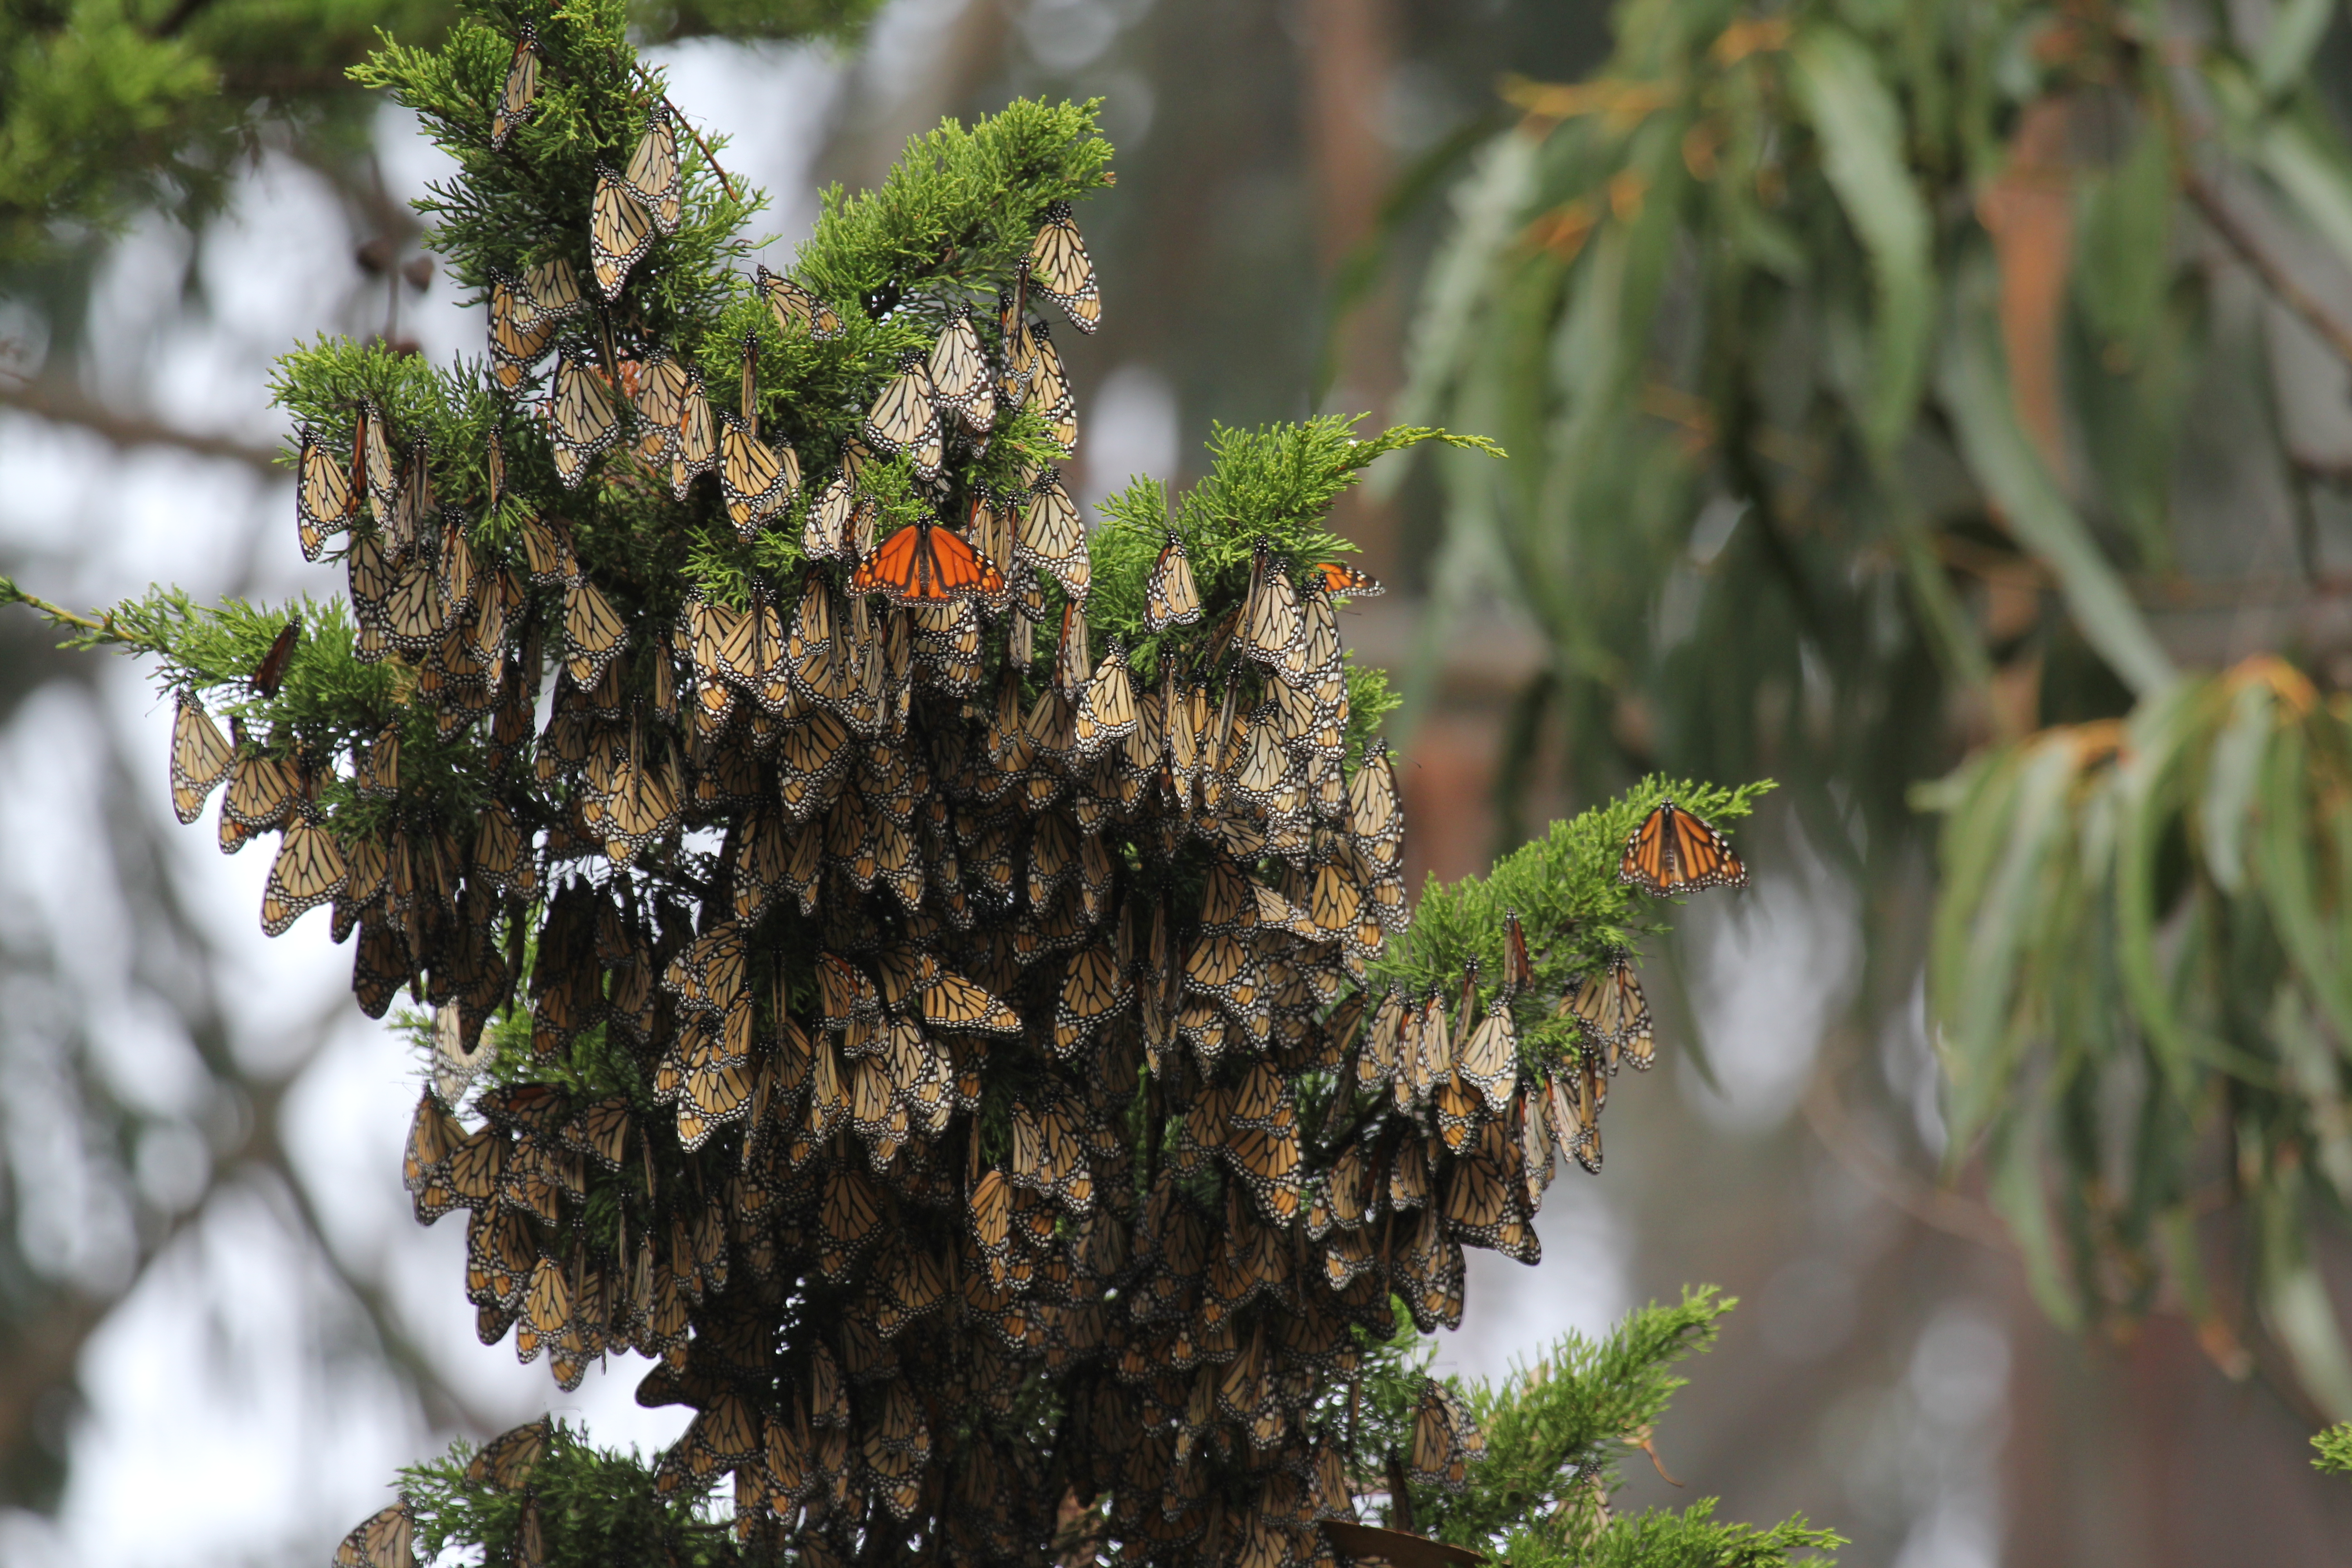 Monarchs cluster tightly together in a large group on a pine branch on a gloomy, rainy day. Most of the monarchs have their wings closed, showing the dull, orange-brown side that resembles dead leaves. One monarch in the center of this dense cluster has its wings open, seemingly shining against the others, with its bright orange and black coloration.